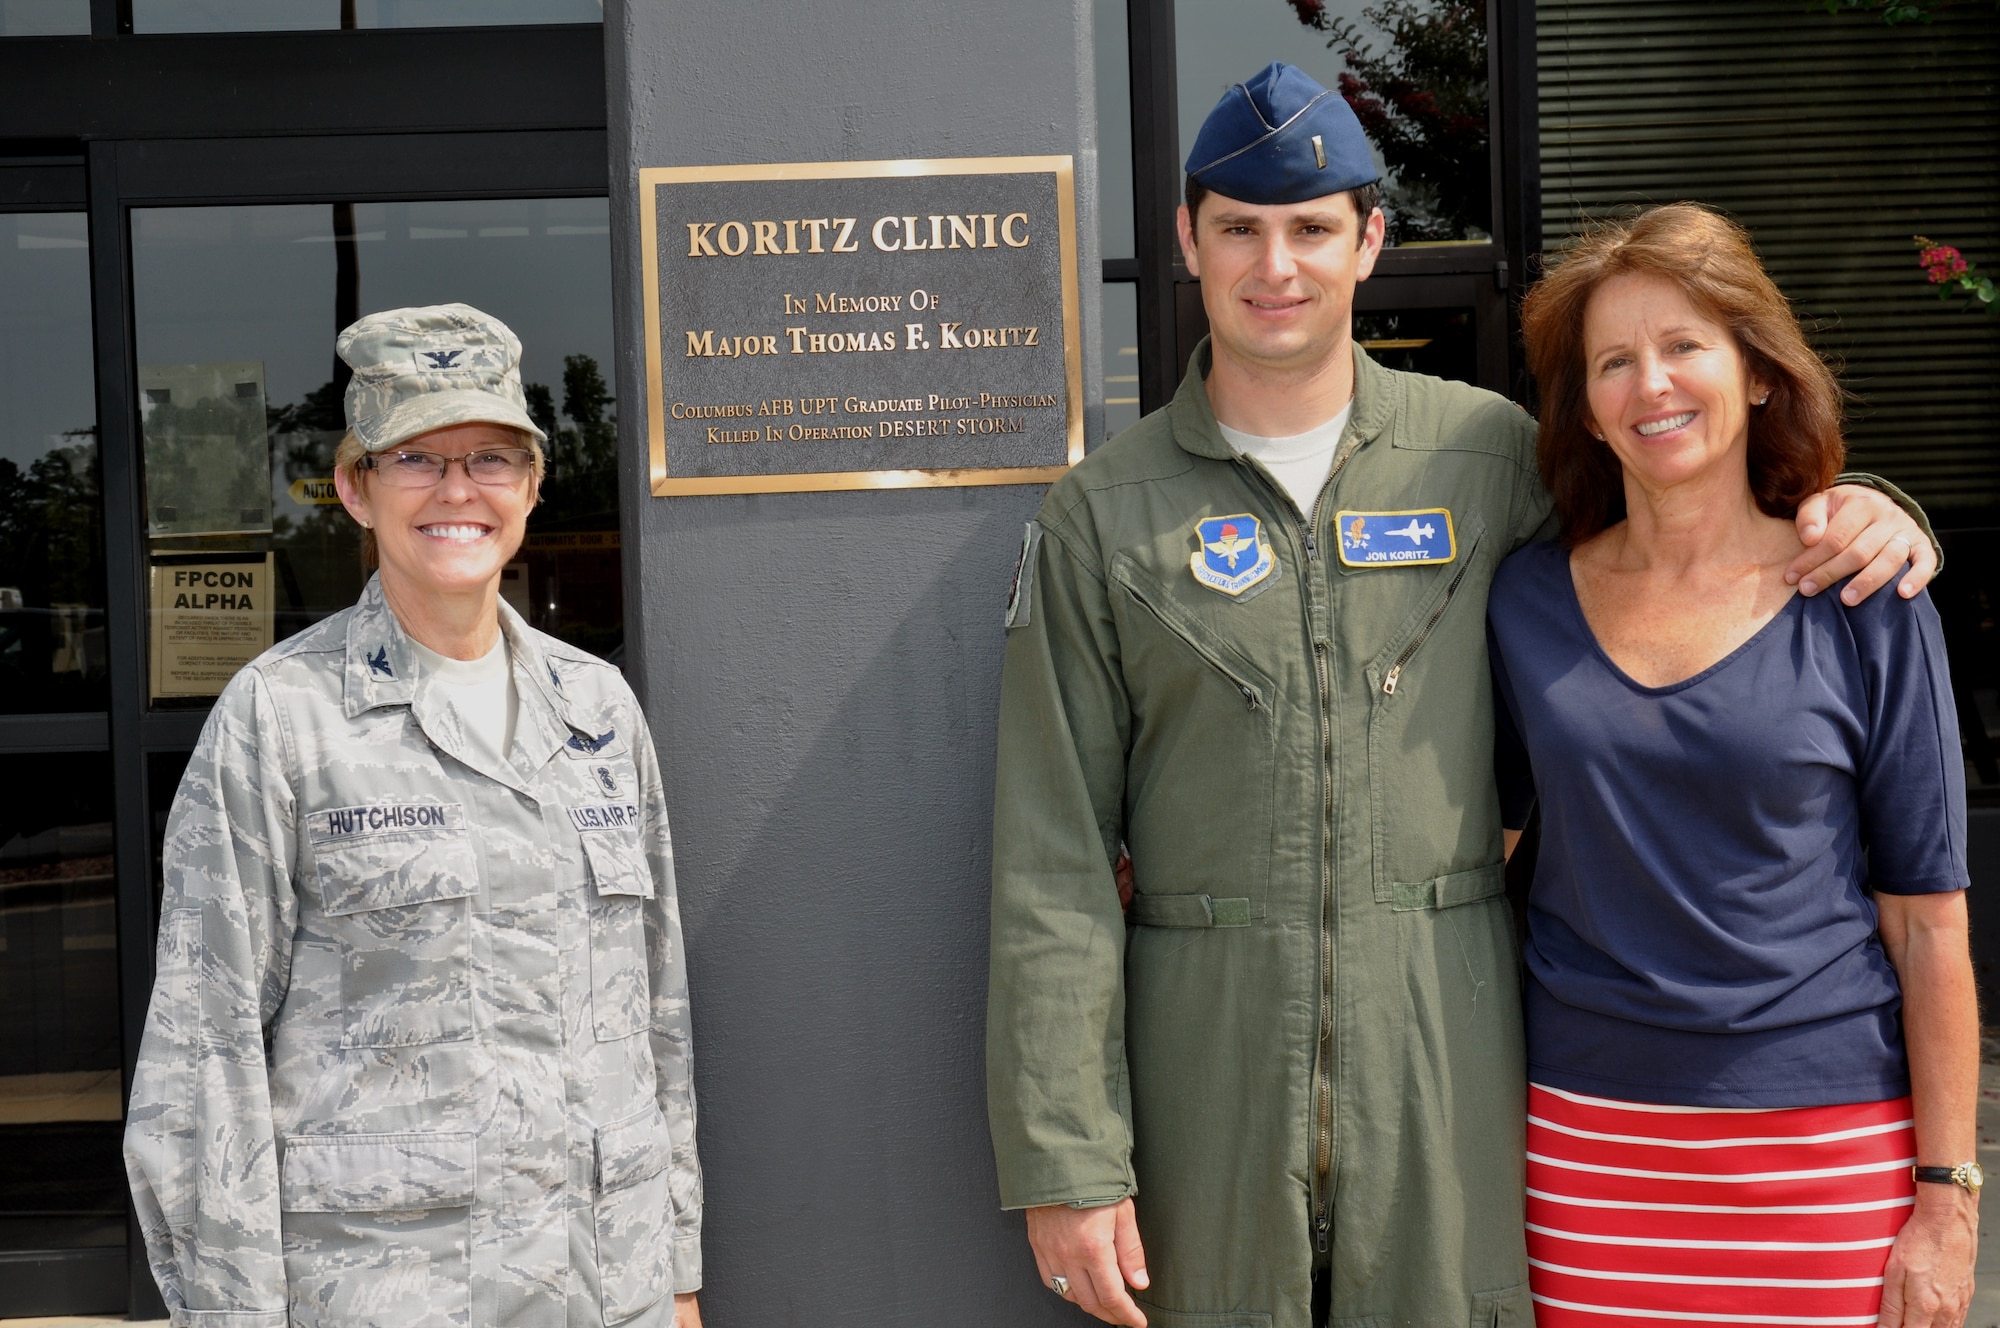 Col. Billye Hutchison,14th Medical Group Commander, poses for a photo with 2nd Lt. Jon Koritz, Specialized Undergraduate Pilot Training Class 13-13 Graduate, and his mother Julianne Koritz outside of the Koritz Clinic August 3. The Koritz Clinic was renamed in 2008 in honor of Maj. Thomas Koritz after he was Killed in Action during the second night of combat in Operation Desert Storm in 1991. (U.S. Air Force Photo/Sonic Johnson)